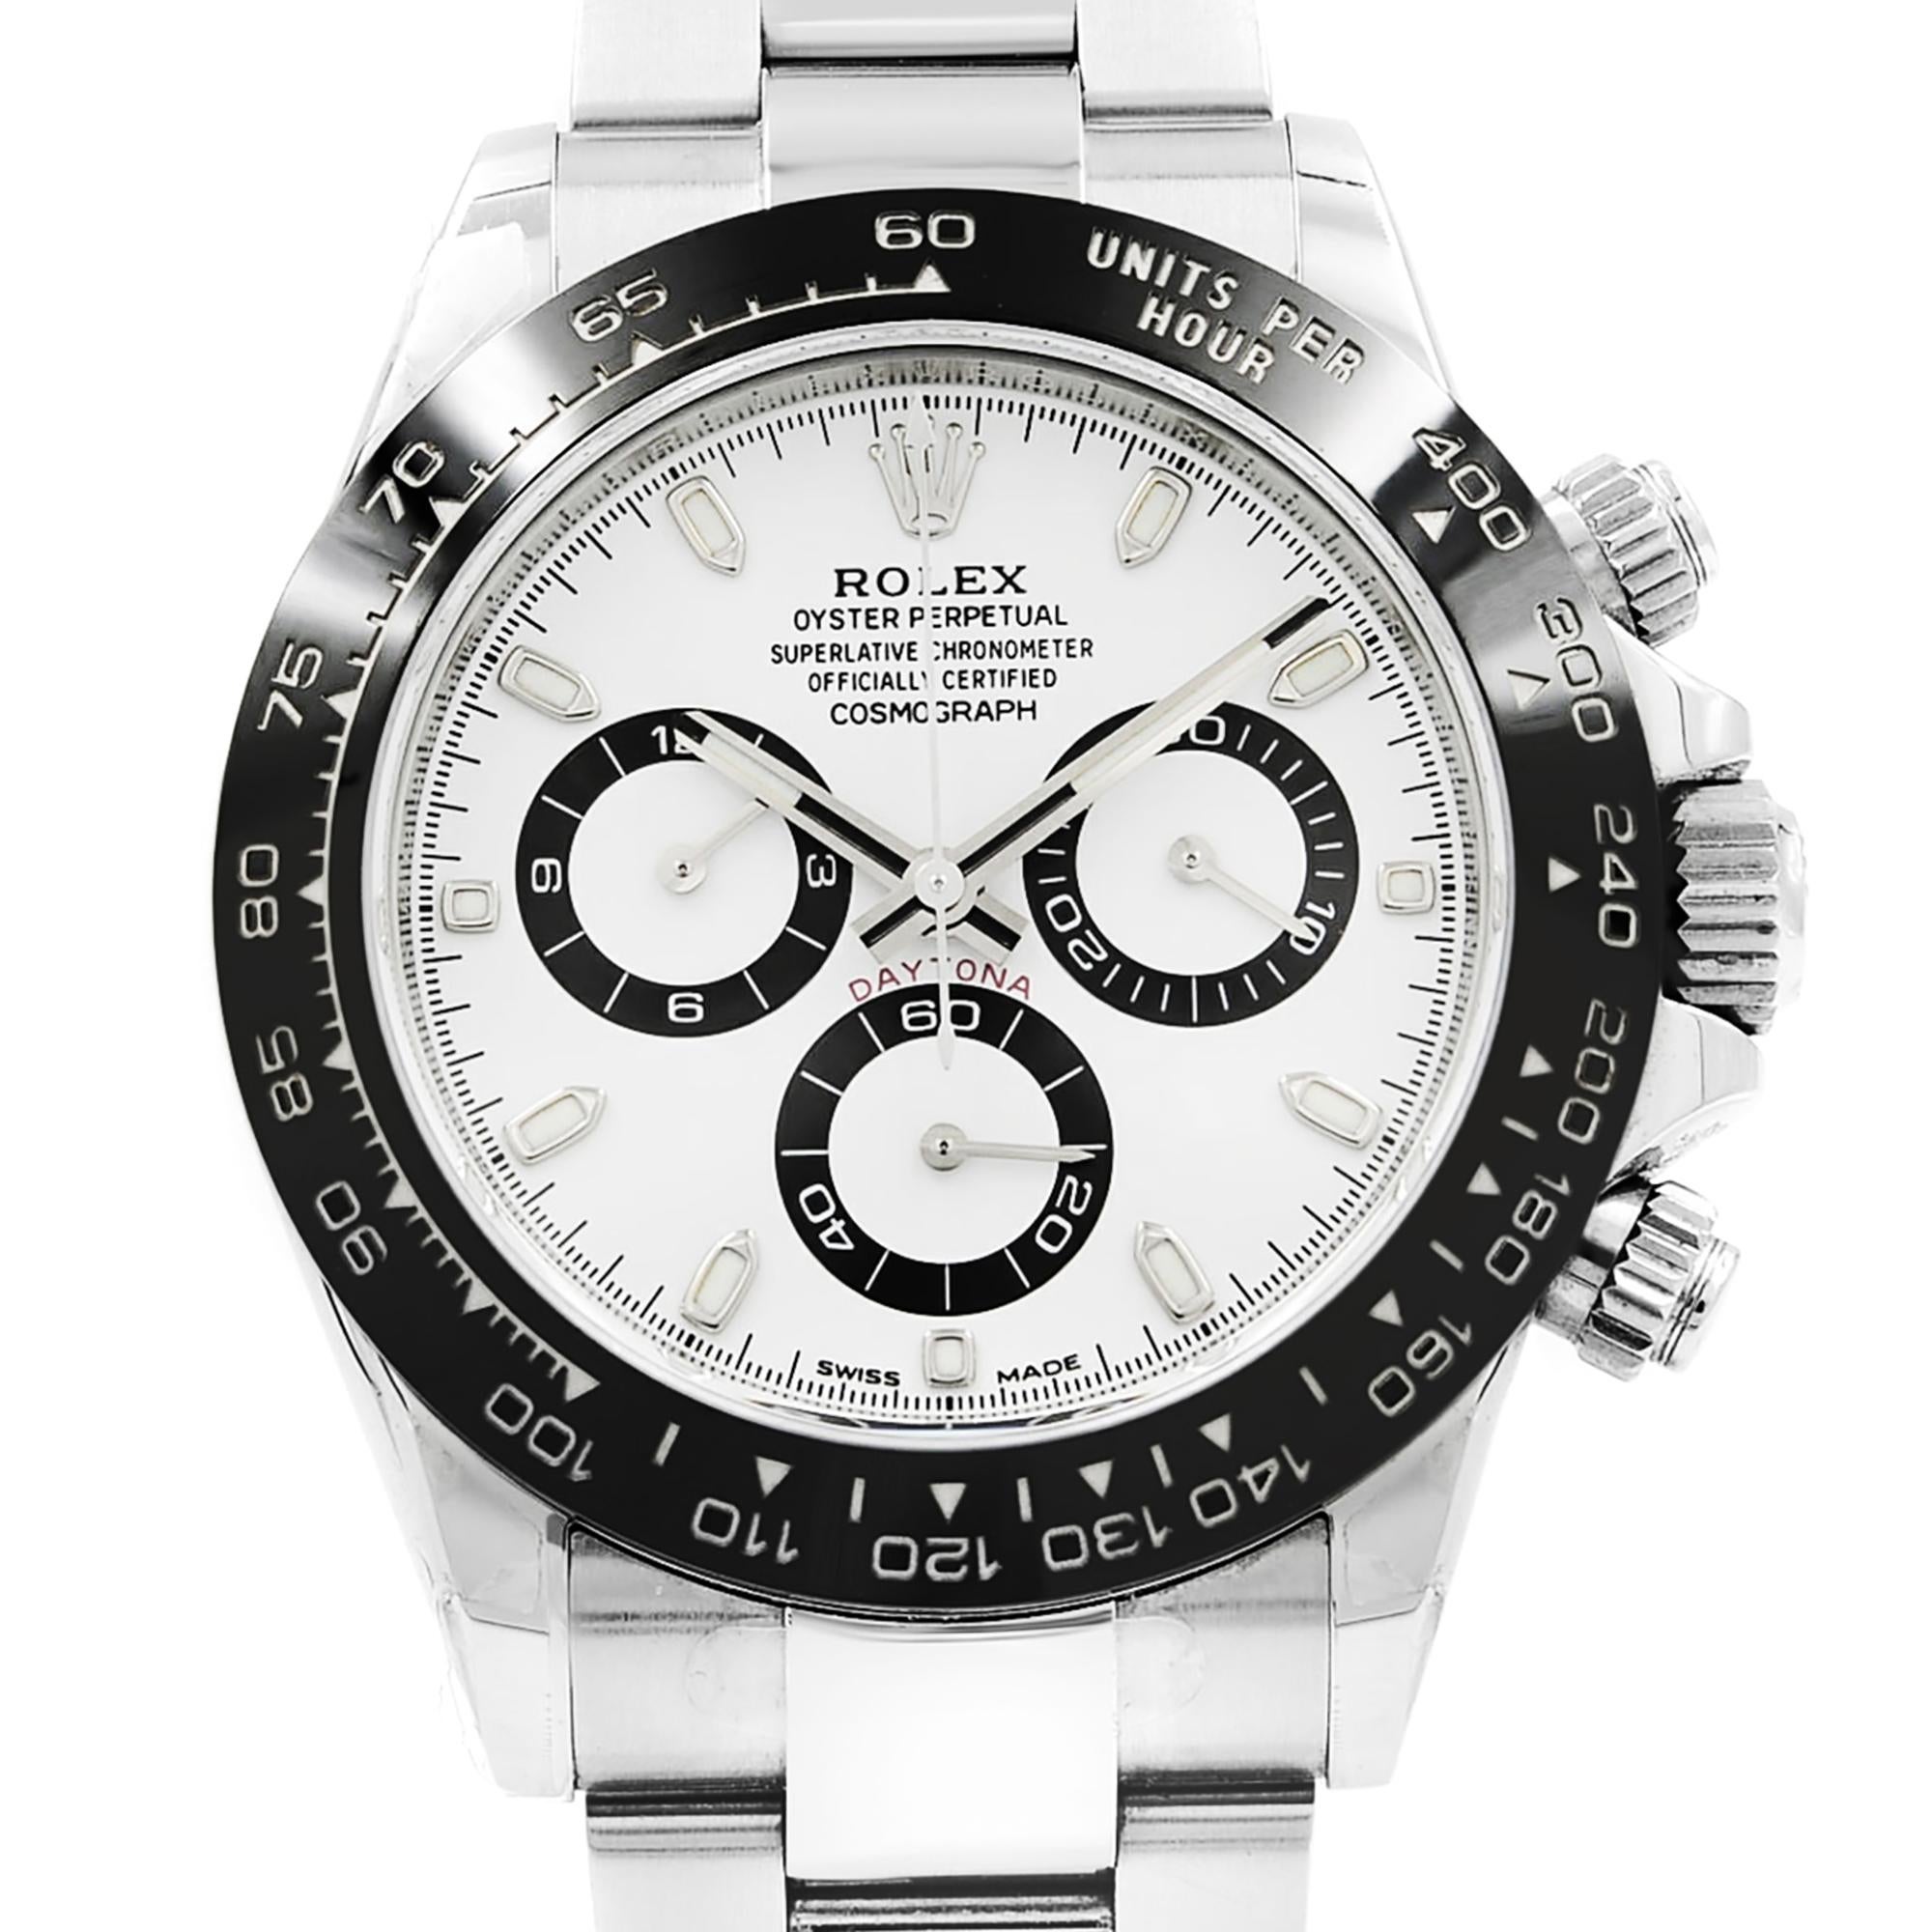 This pre-owned Rolex Daytona 116500LN w is a beautiful men's timepiece that is powered by an automatic movement which is cased in a stainless steel case. It has a round shape face, chronograph, small seconds subdial, tachymeter dial and has hand